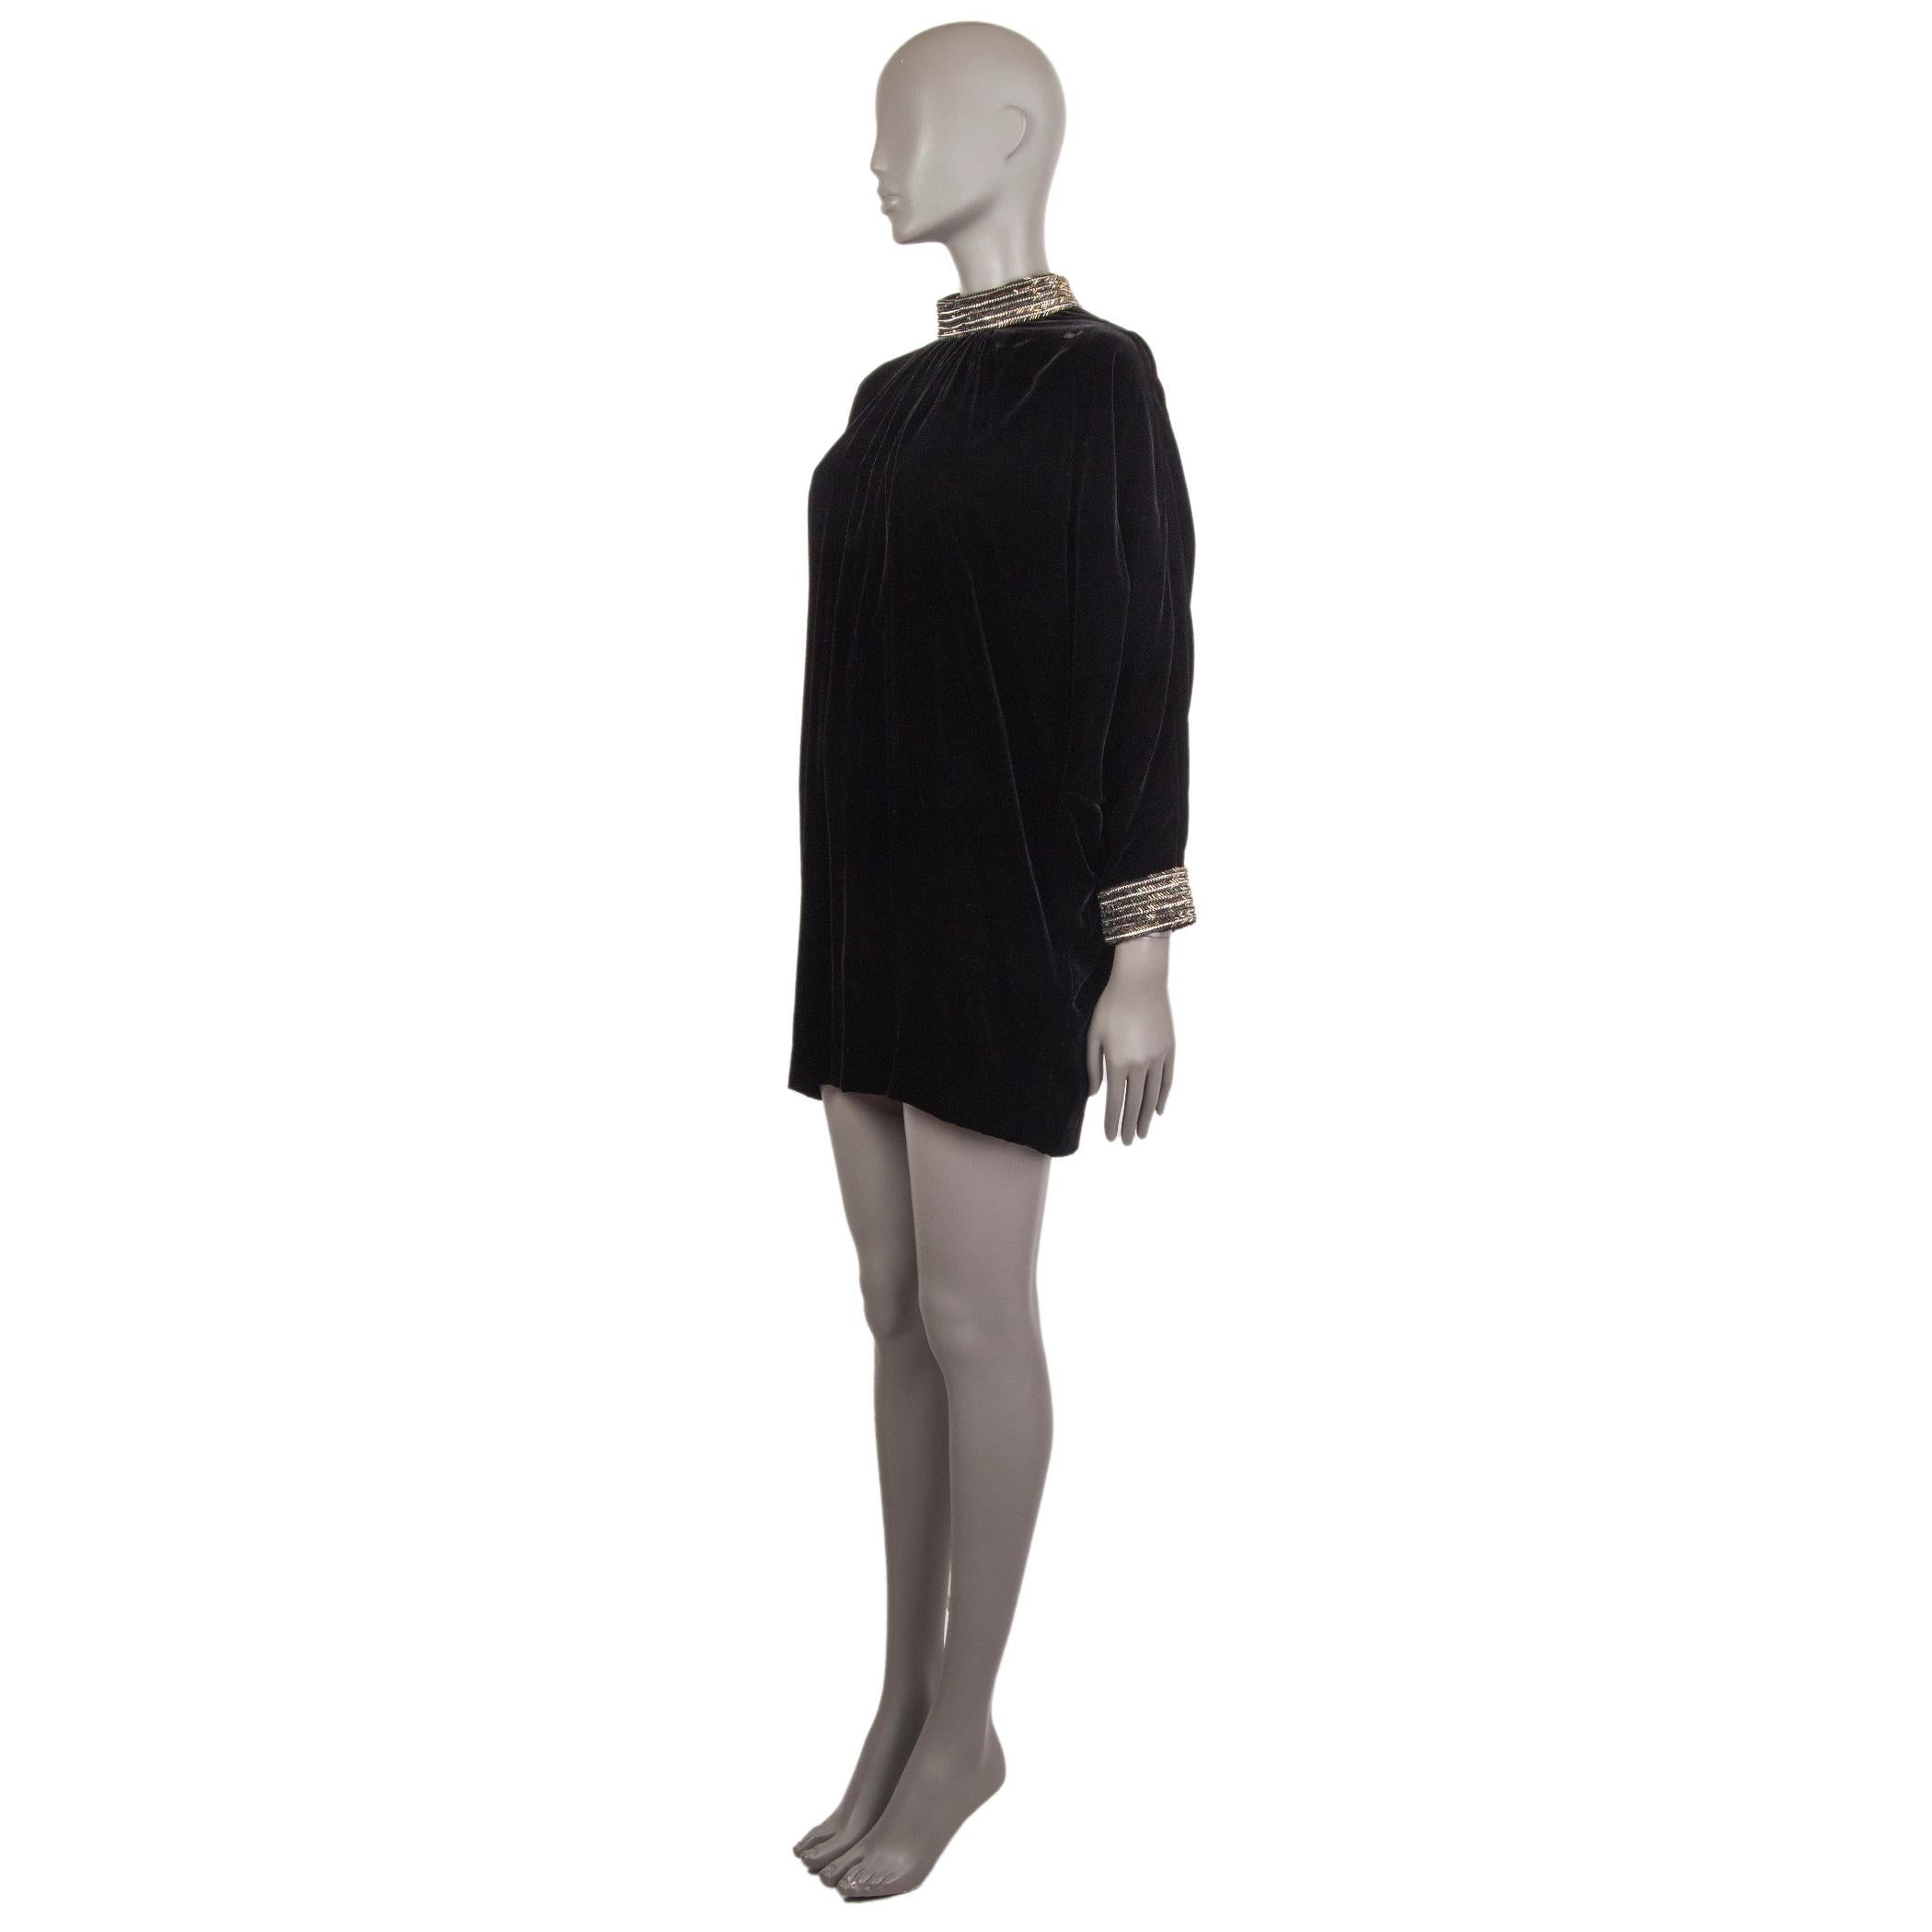 Saint Laurent velvet mini dress in black viscose (78%) and silk (22%). With beaded mock neck and cuffs, pleats falling from the neckline, and batwing sleeves. Closes with three hooks behind the neck and invisible zipper on the back. Lined in black